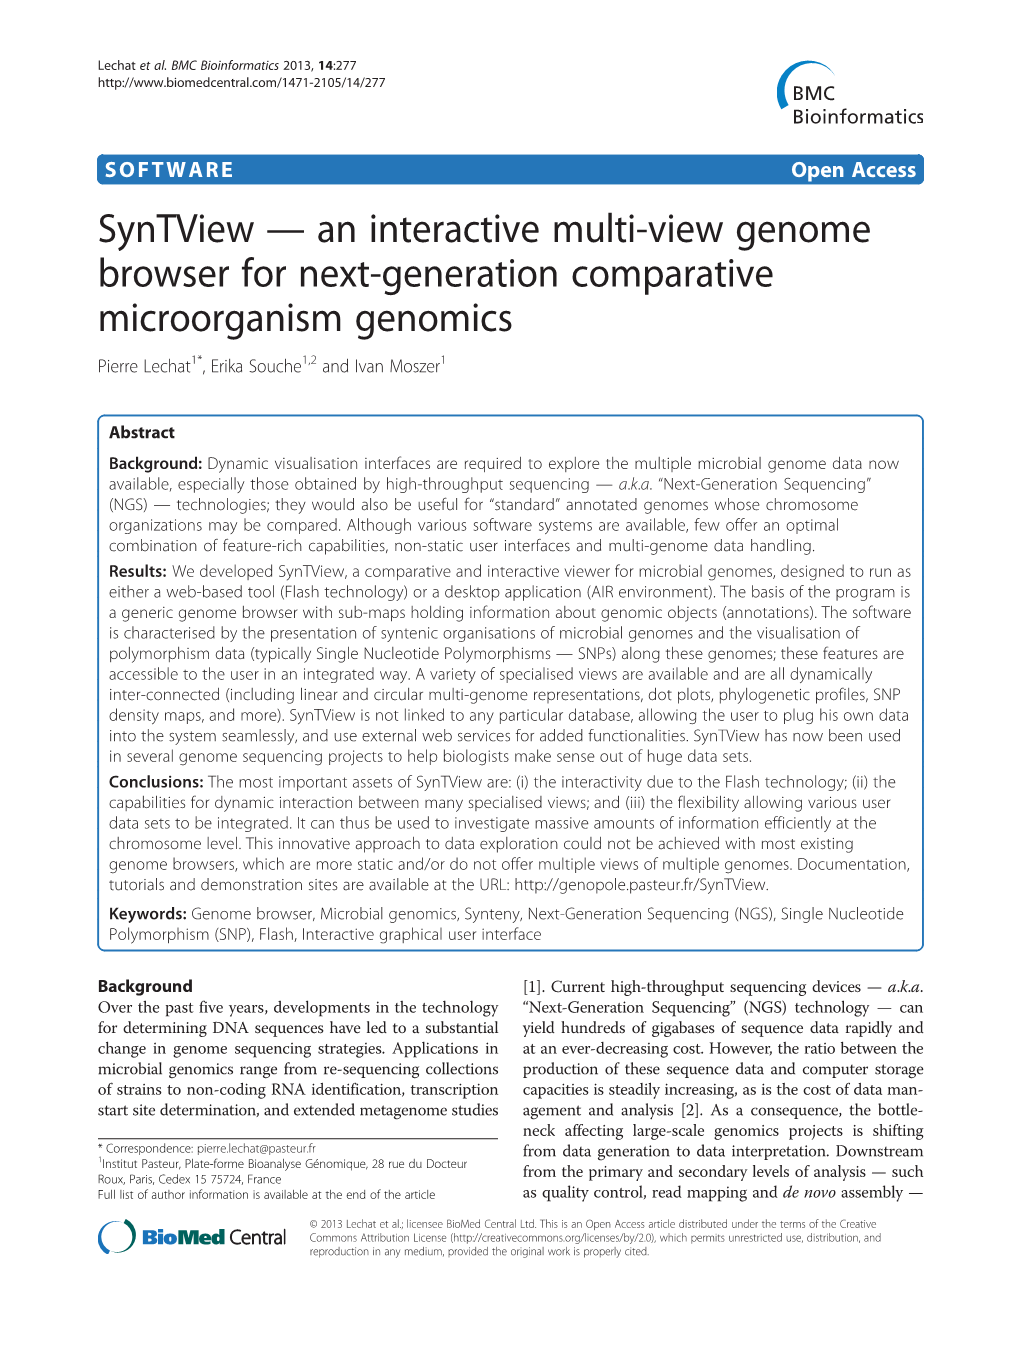 View — an Interactive Multi-View Genome Browser for Next-Generation Comparative Microorganism Genomics Pierre Lechat1*, Erika Souche1,2 and Ivan Moszer1